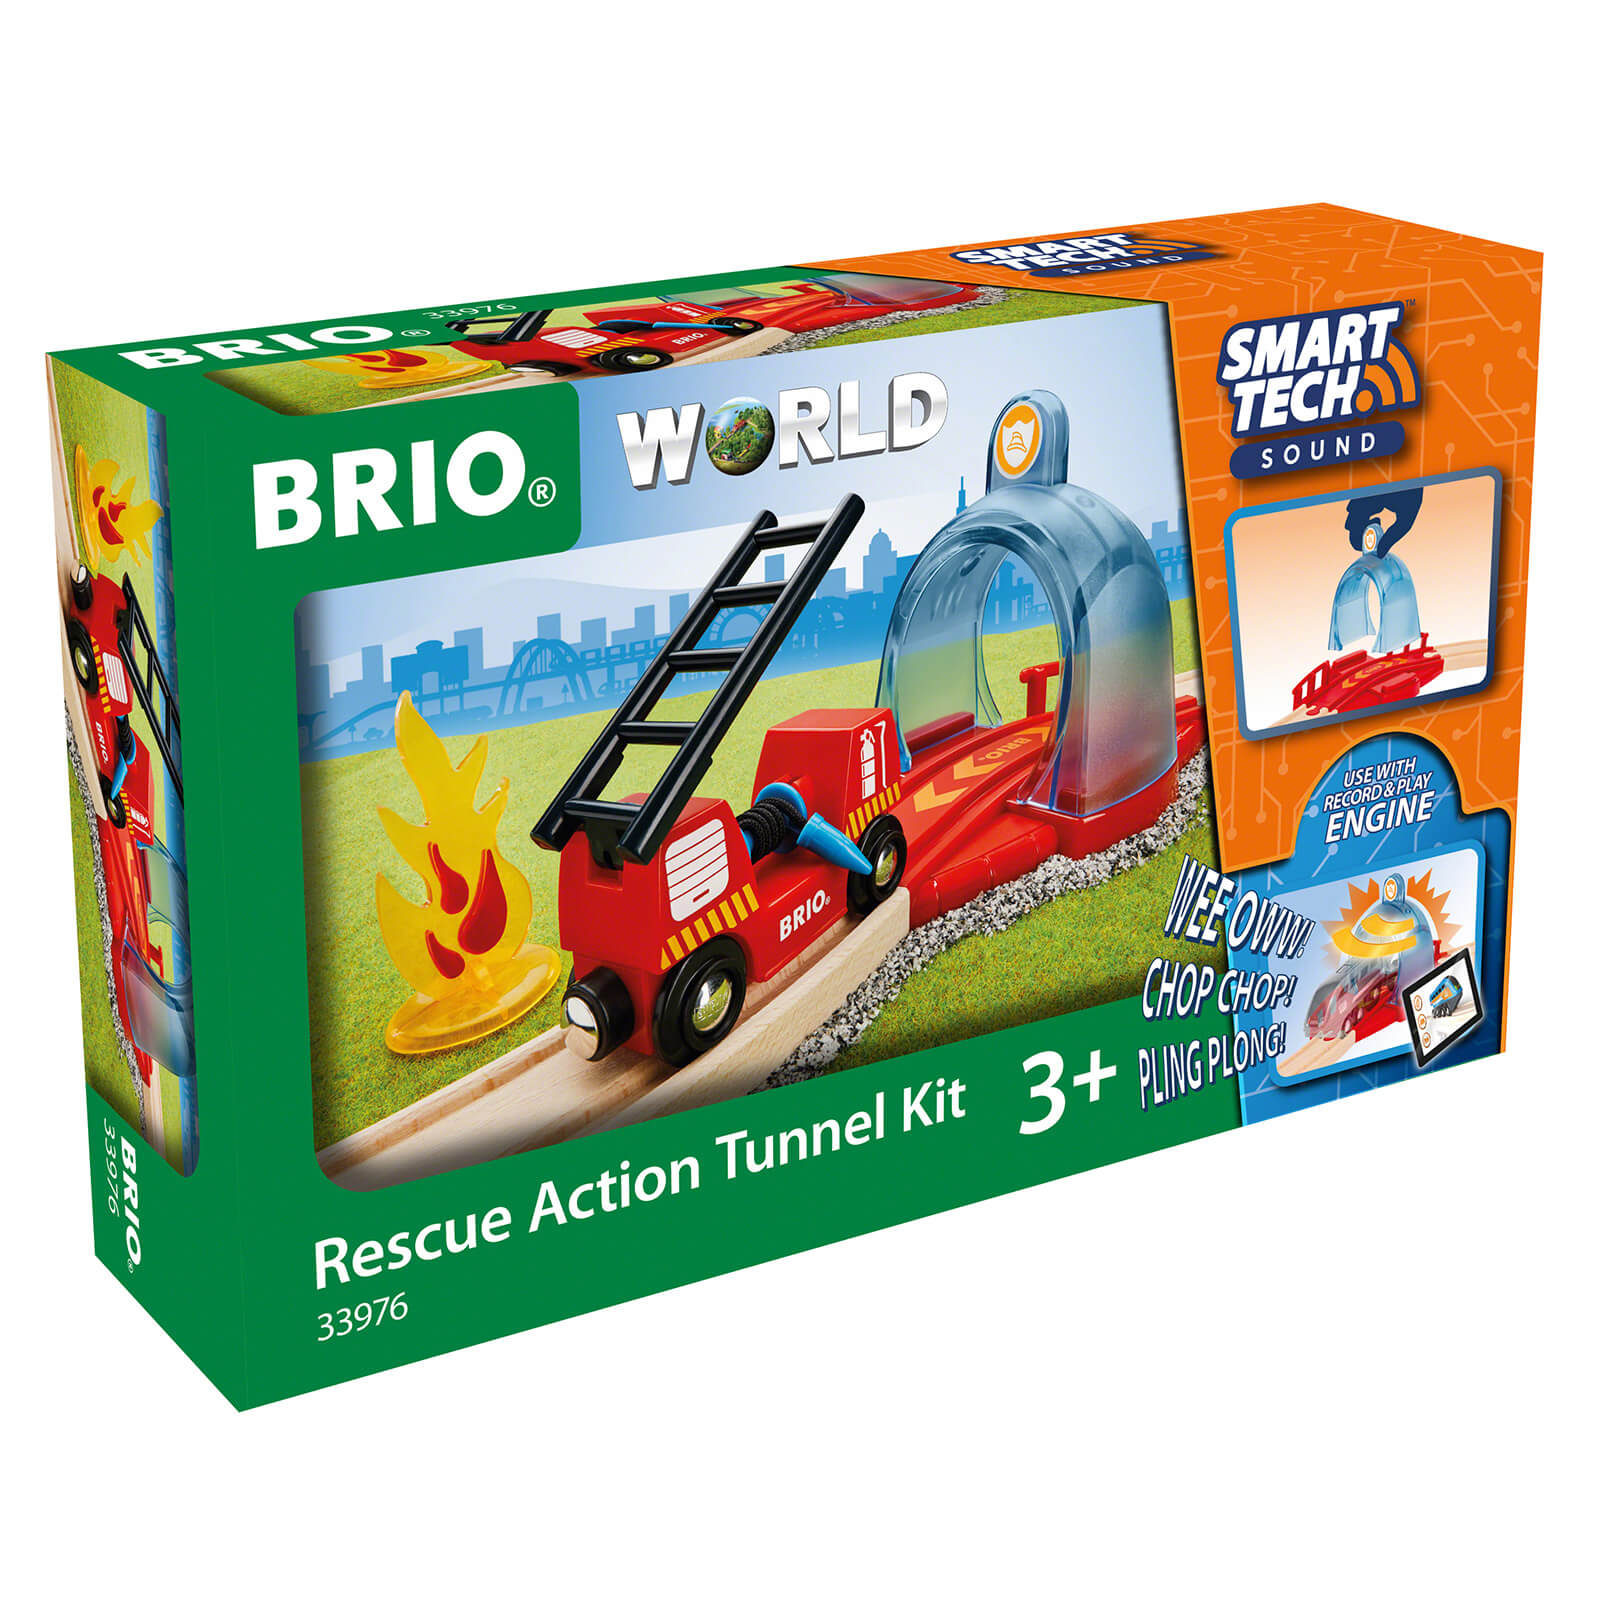 Image of Brio Smart Tech Sound - Rescue Action Tunnel Kit